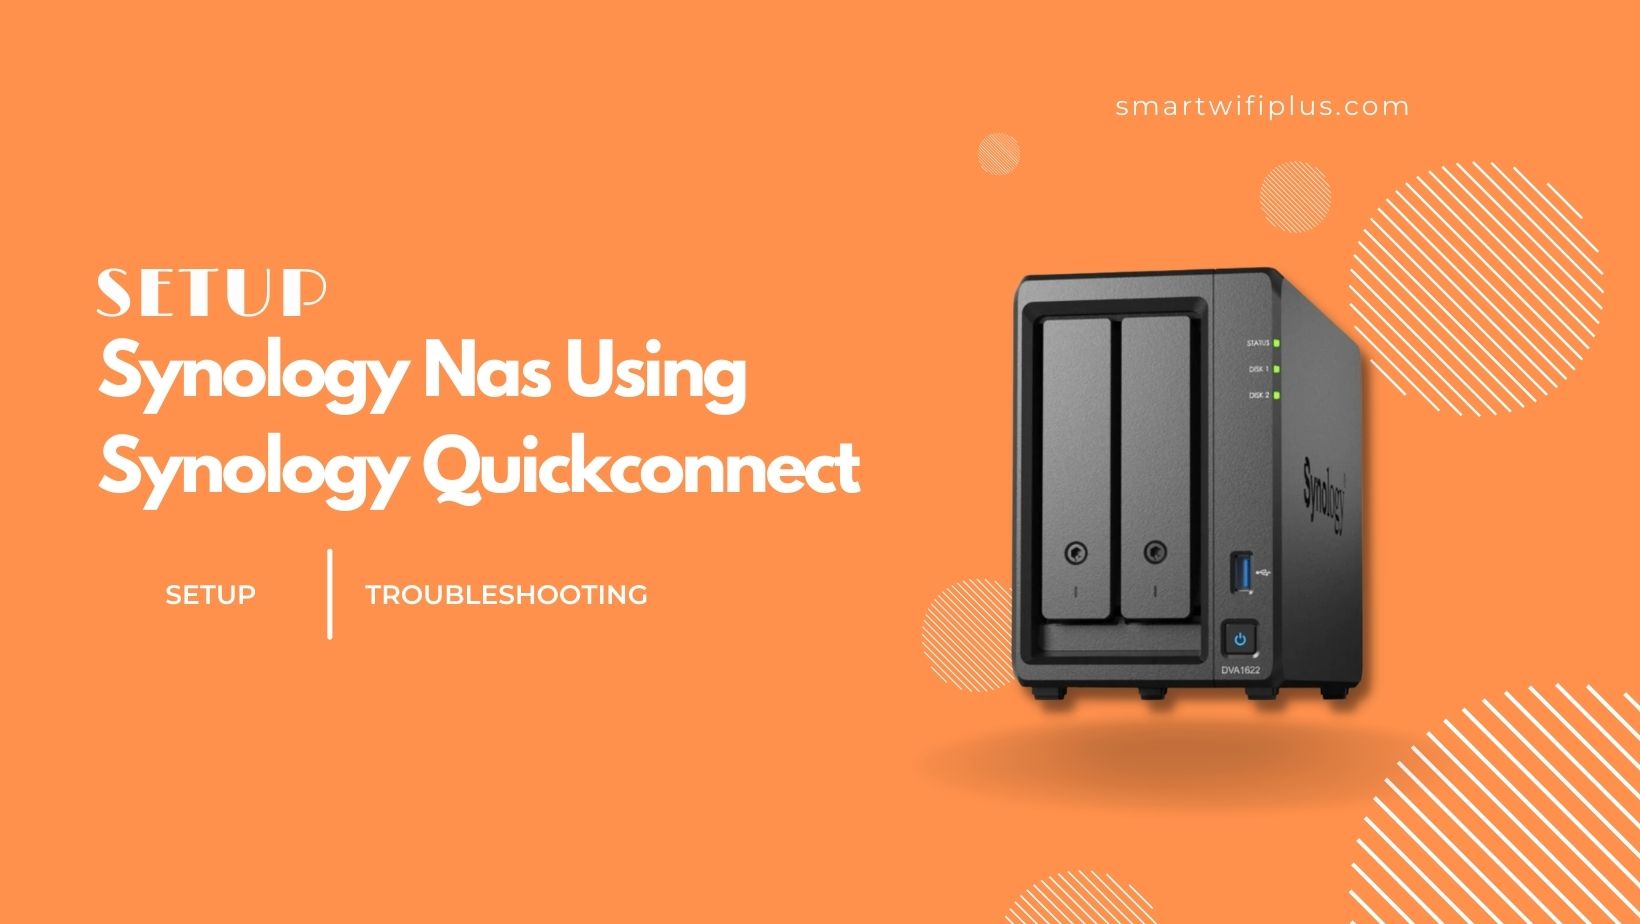 Synology Nas Using Synology Quickconnect